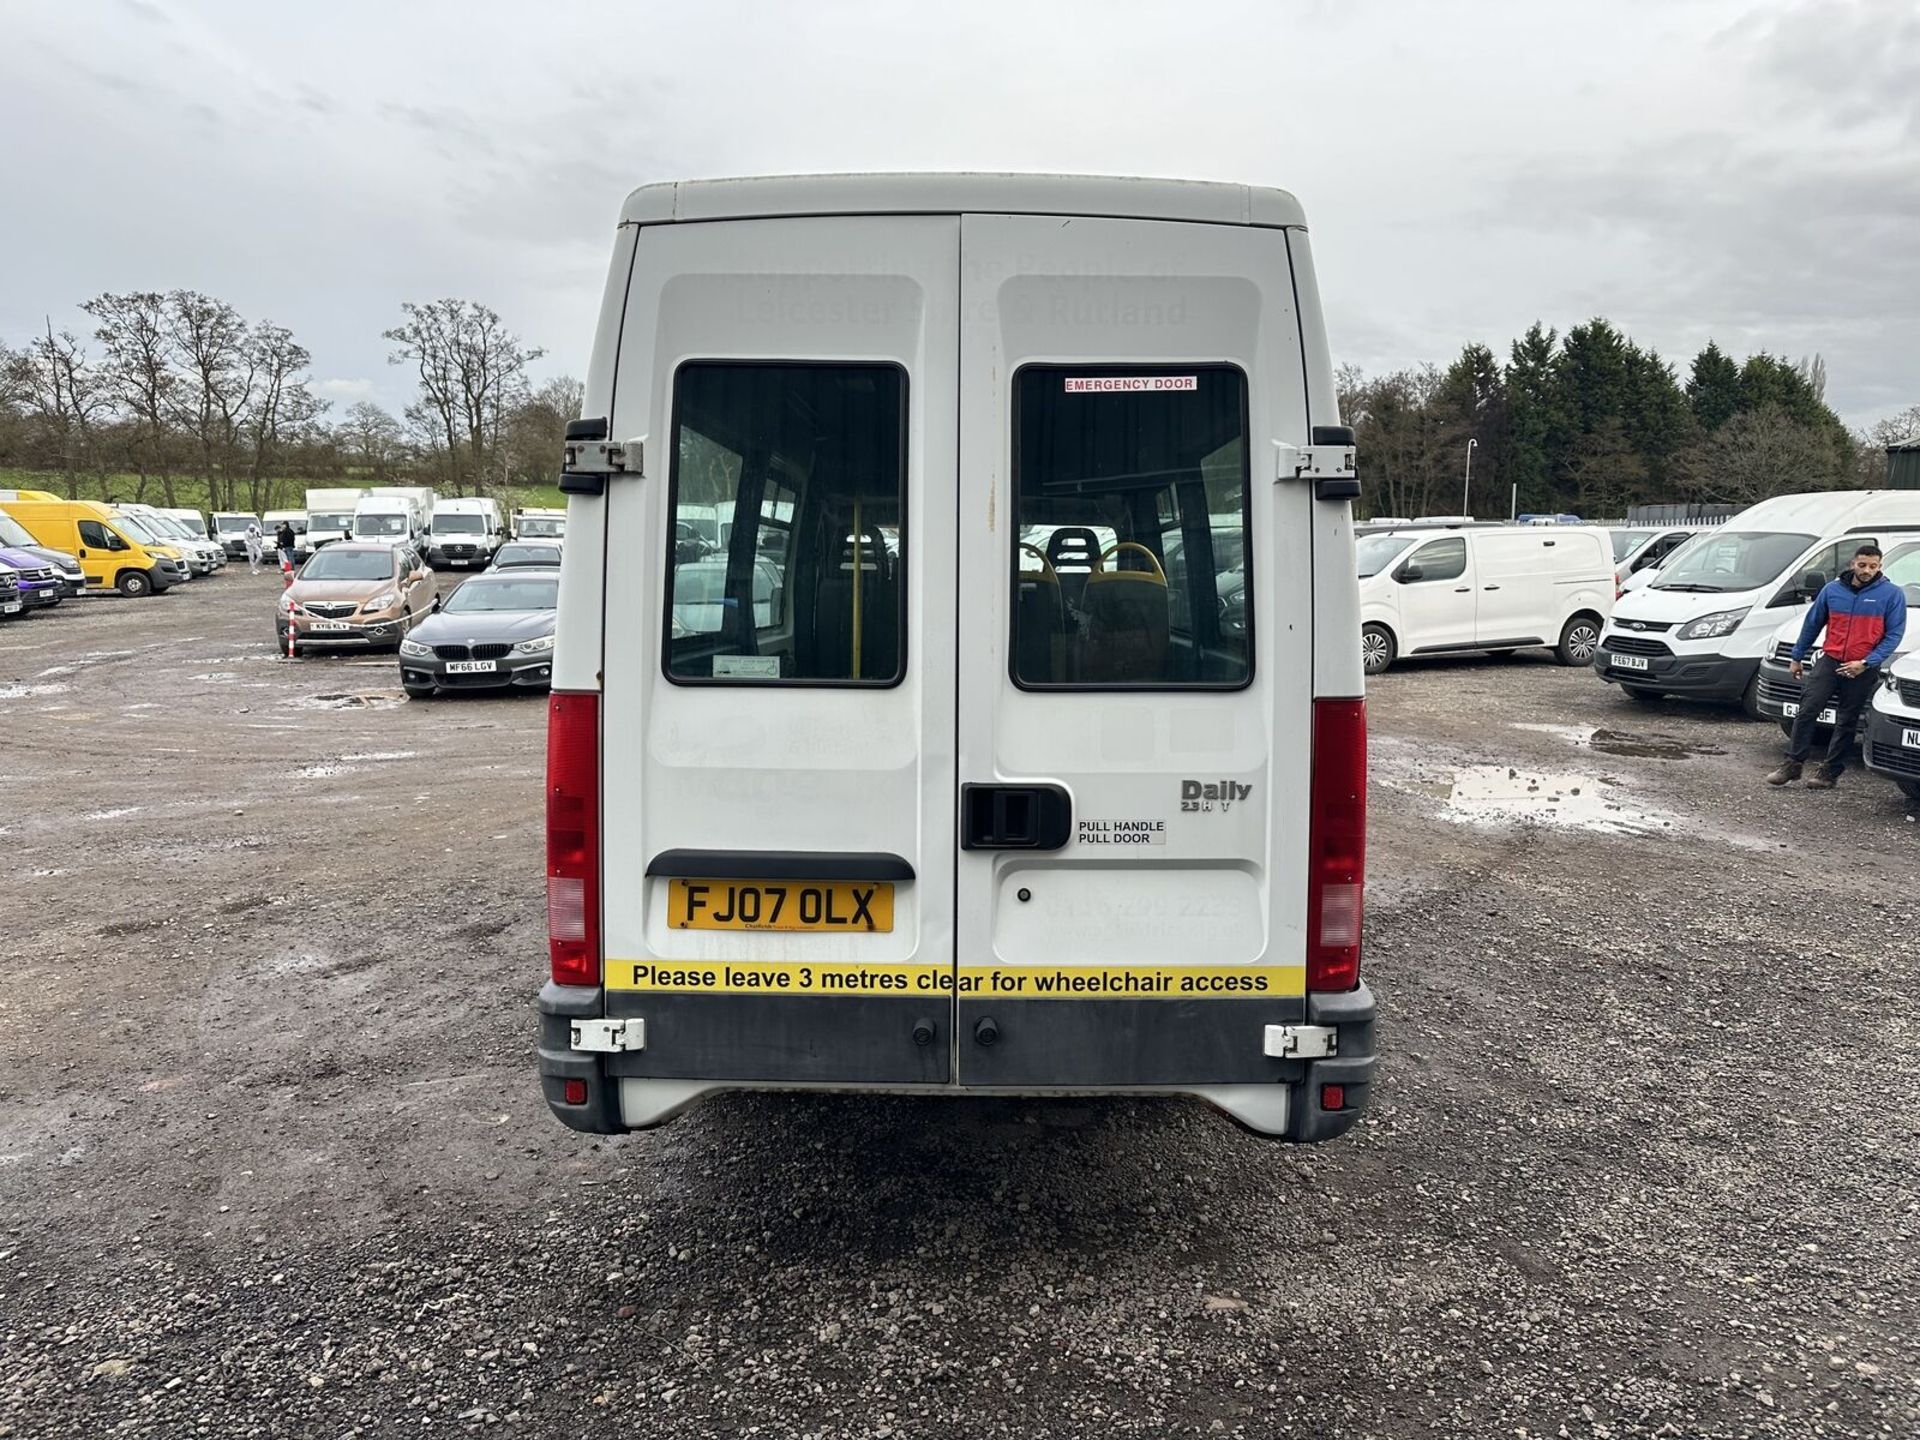 TRANSFORM YOUR TRAVELS: 2007 IVECO DAILY MINIBUS - PERFECT CAMPER CONVERSION CANVAS - Image 11 of 13